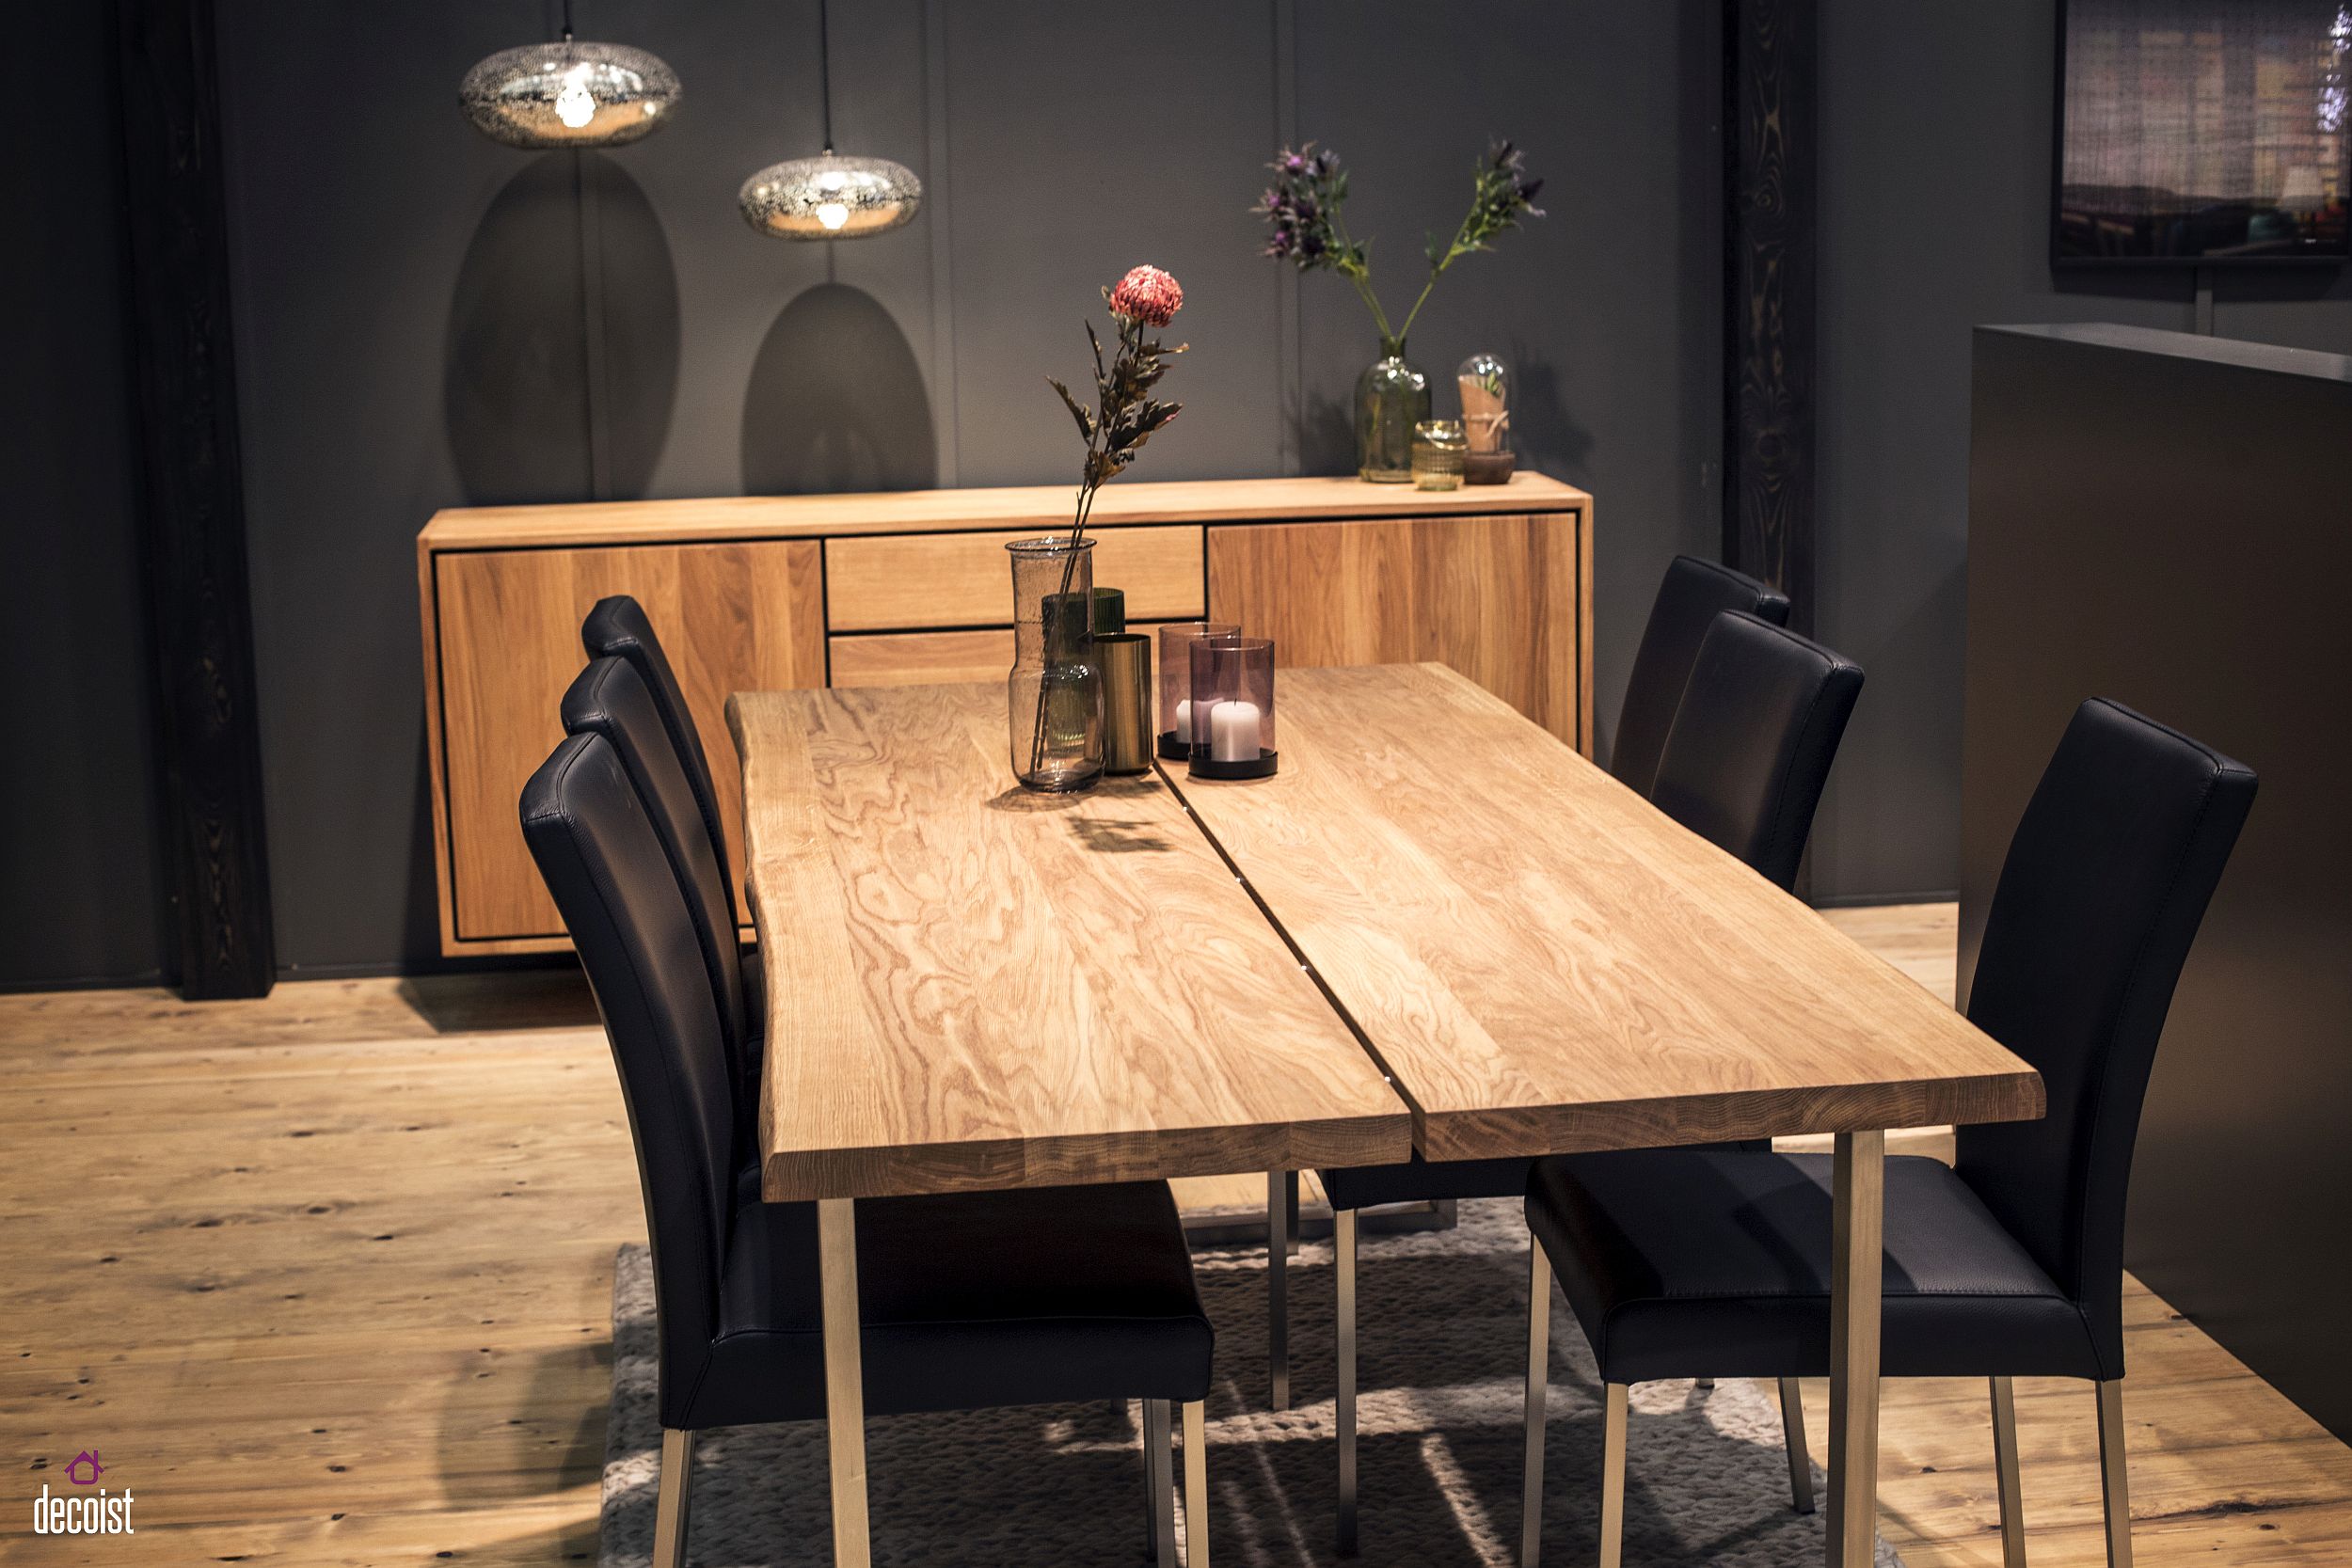 Live-edge-wooden-dining-table-with-a-hint-of-polished-charm